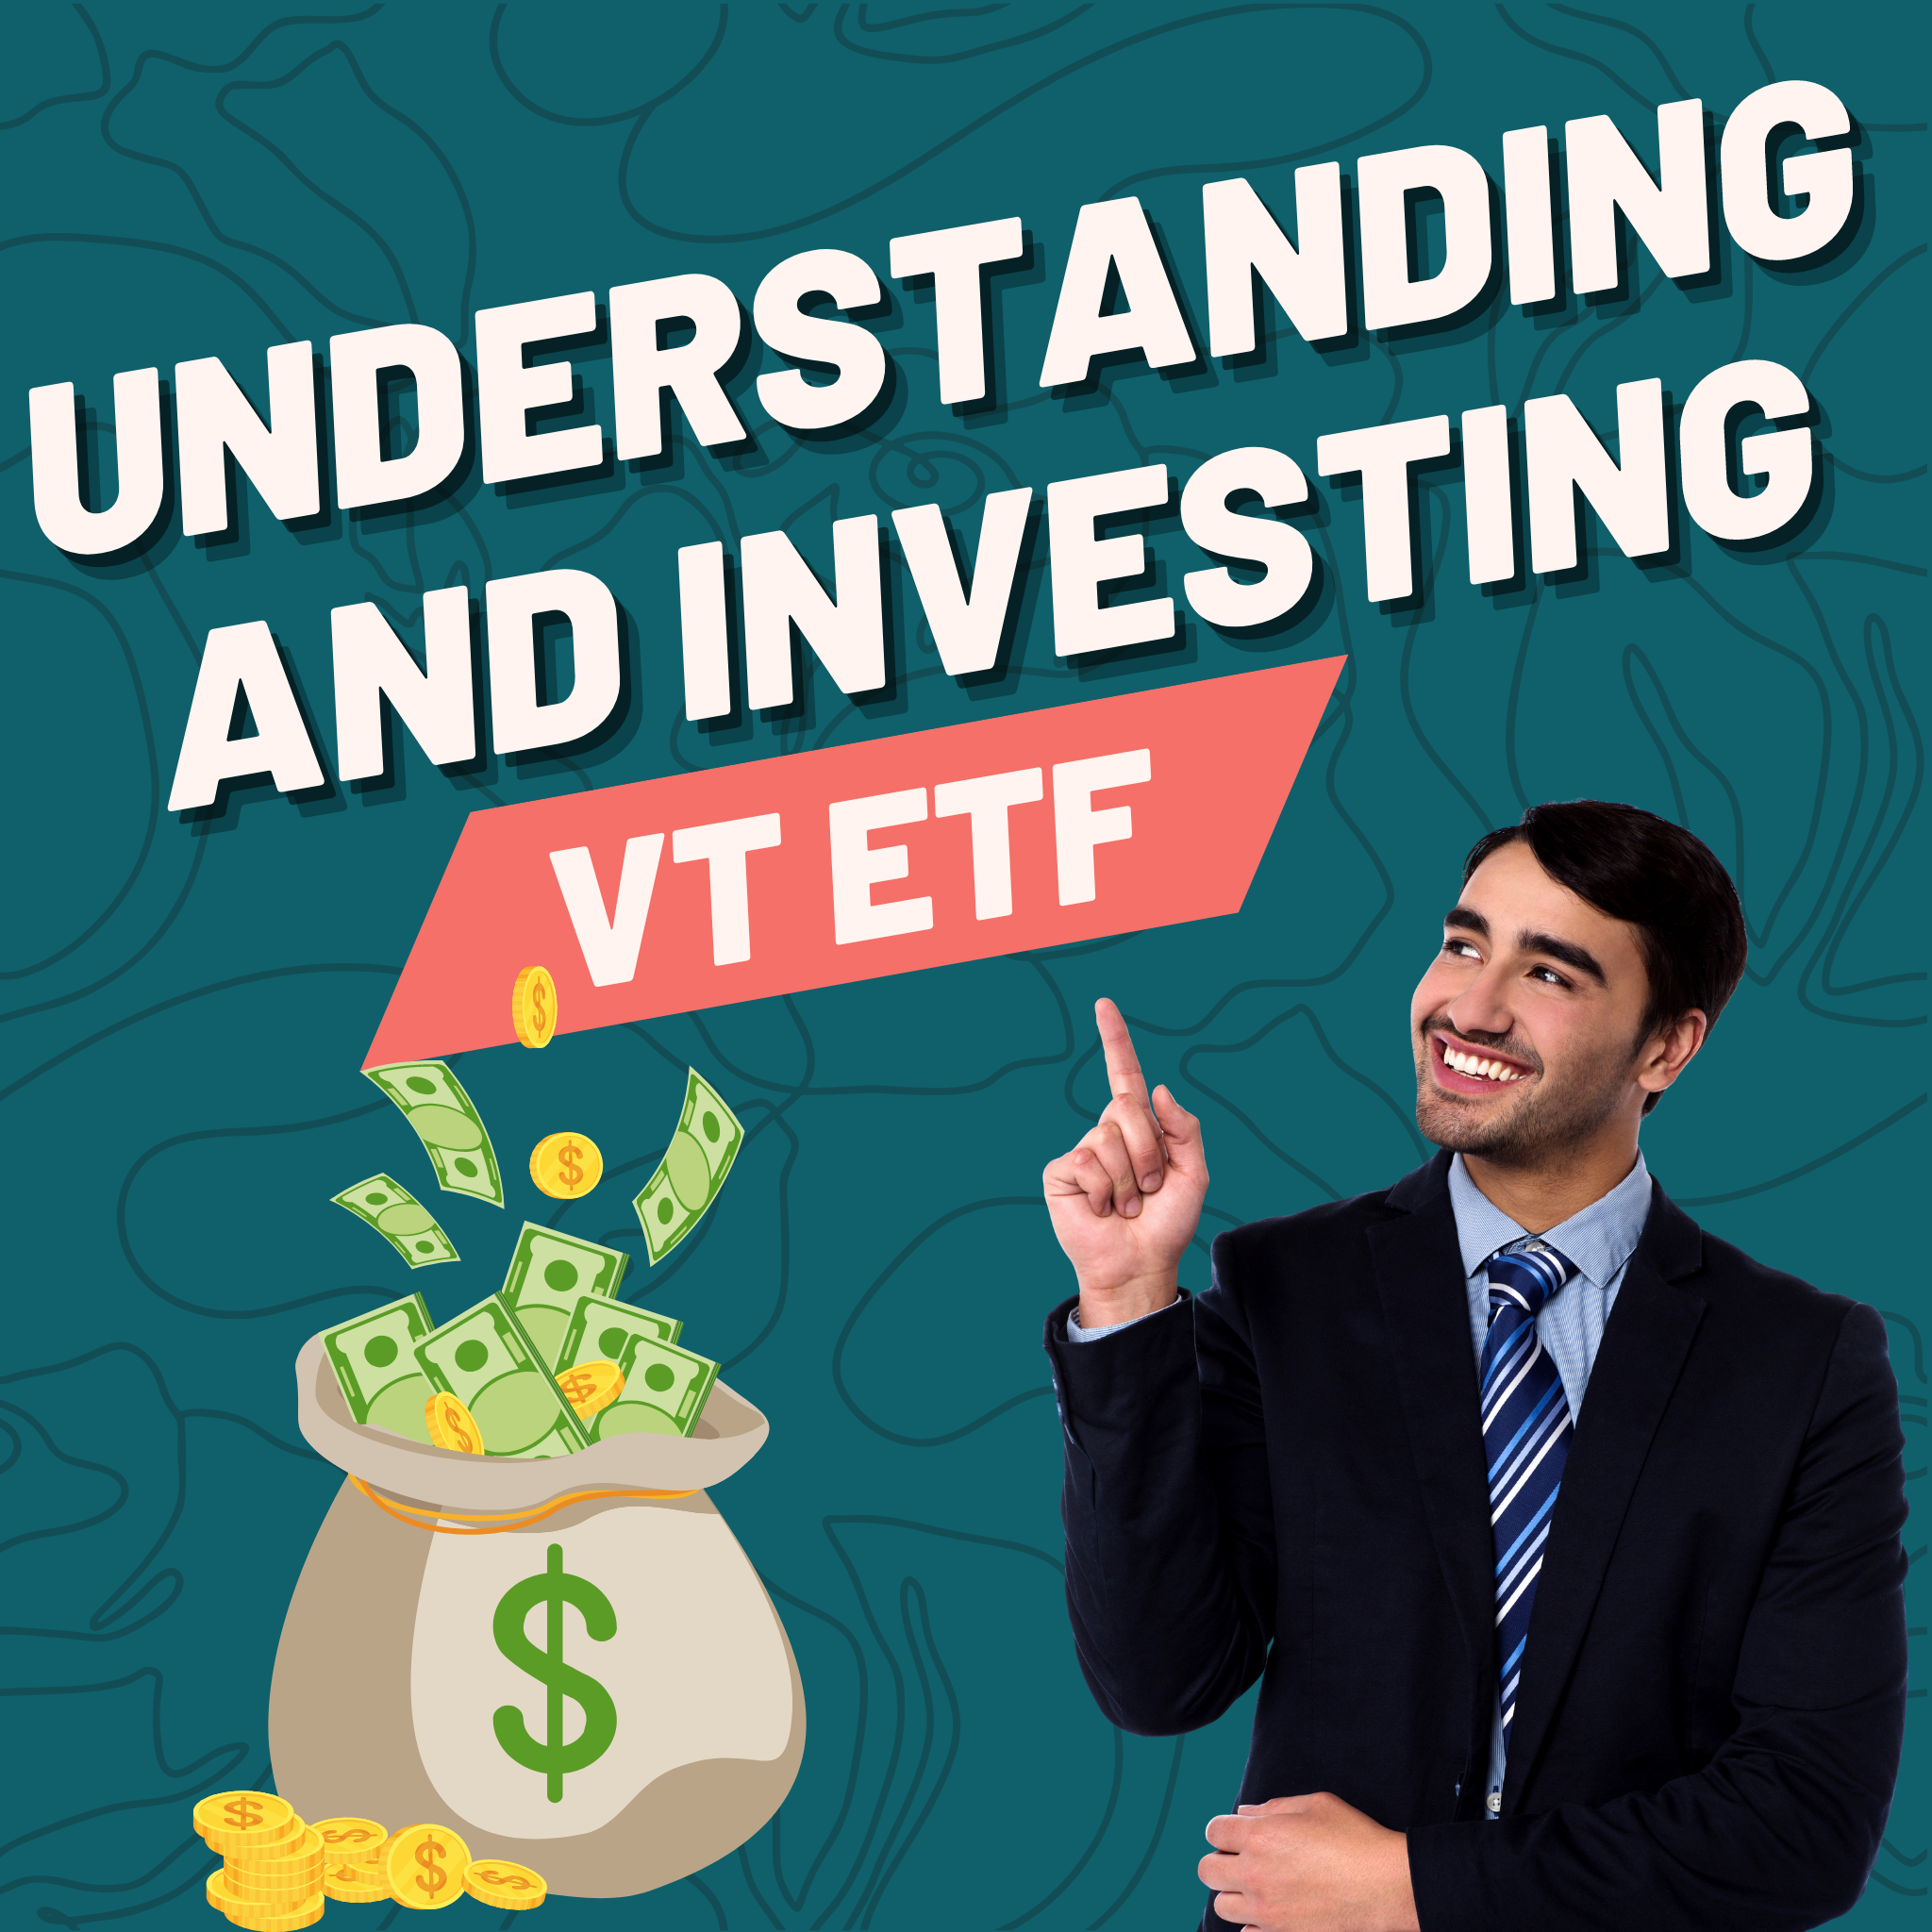 A Comprehensive Guide to Understanding and Investing in VT ETF